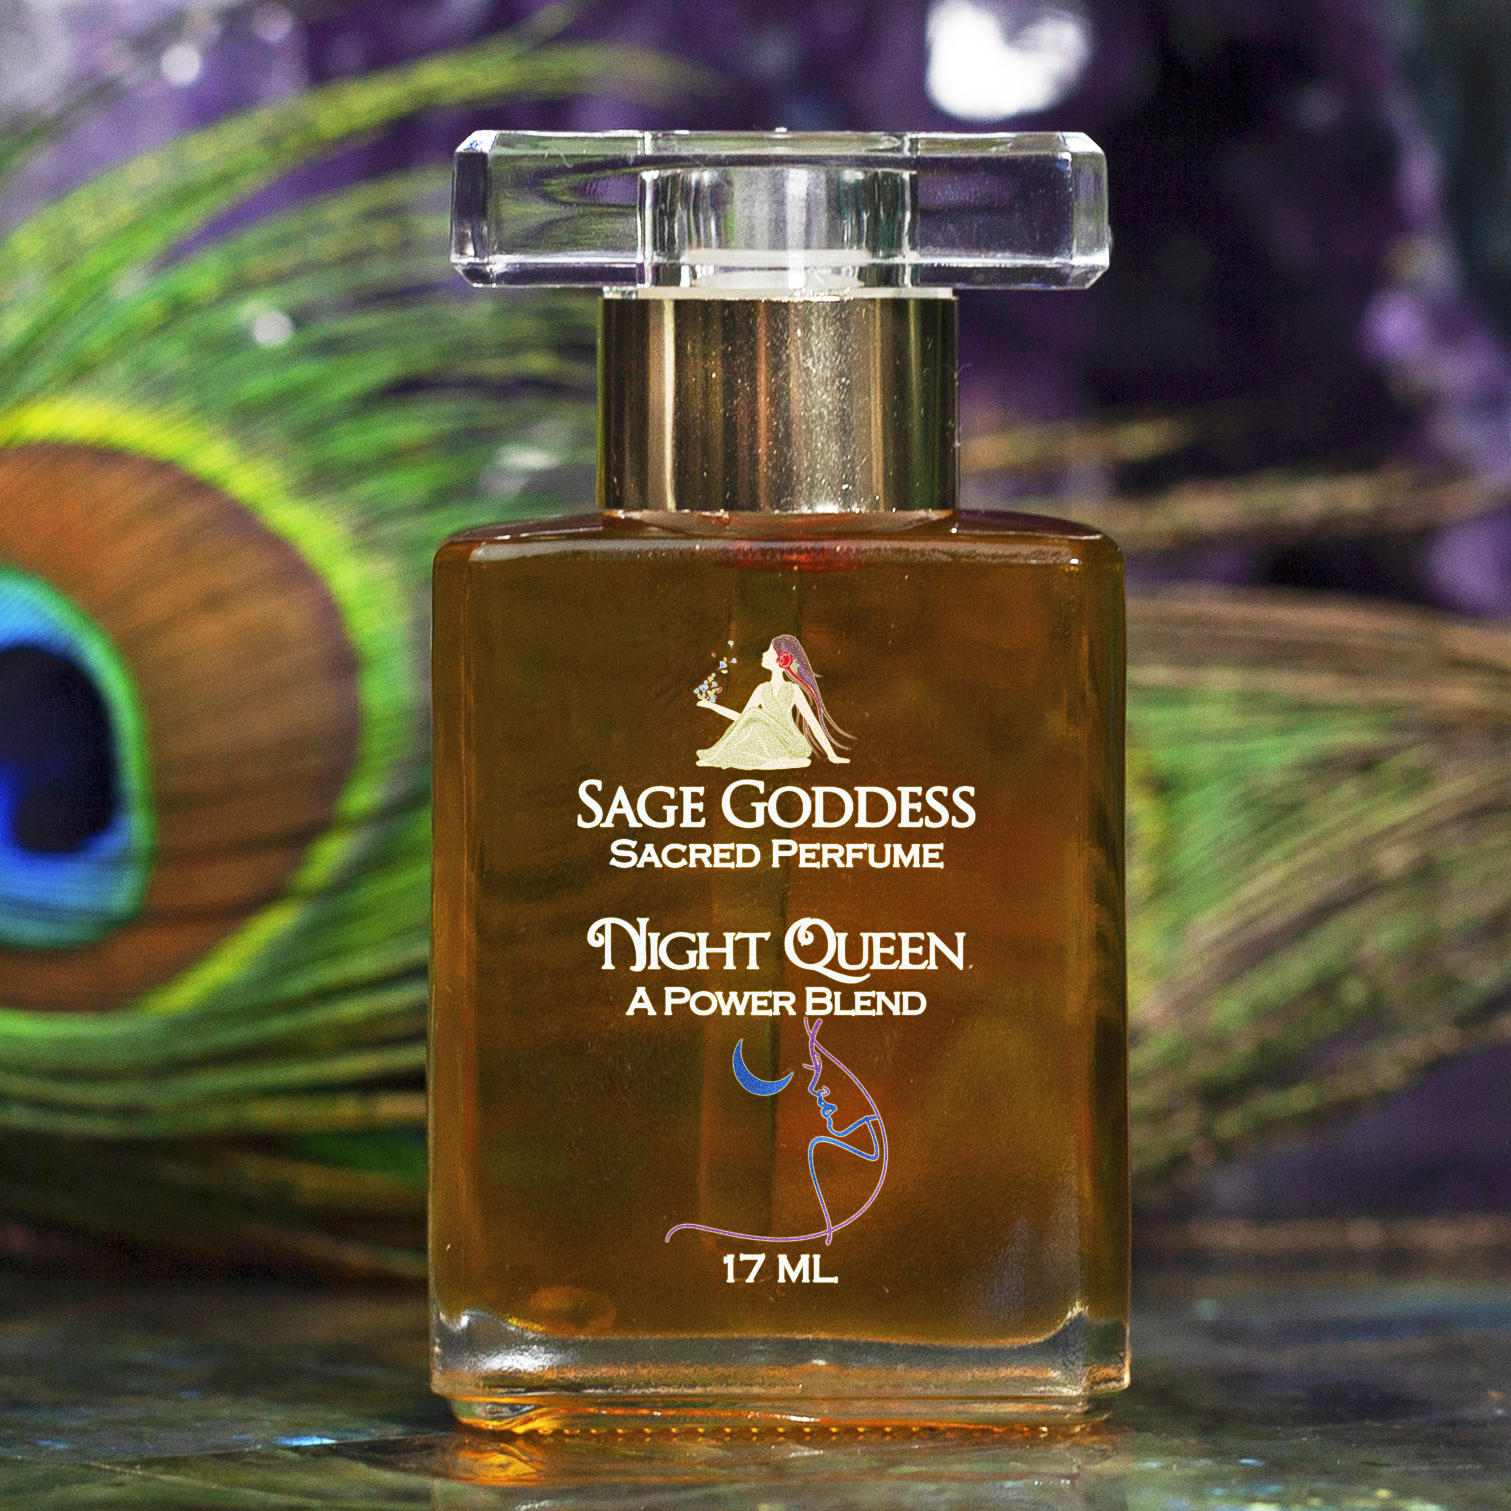 Sage Goddess Night Queen Perfume to awaken sensuality and passion